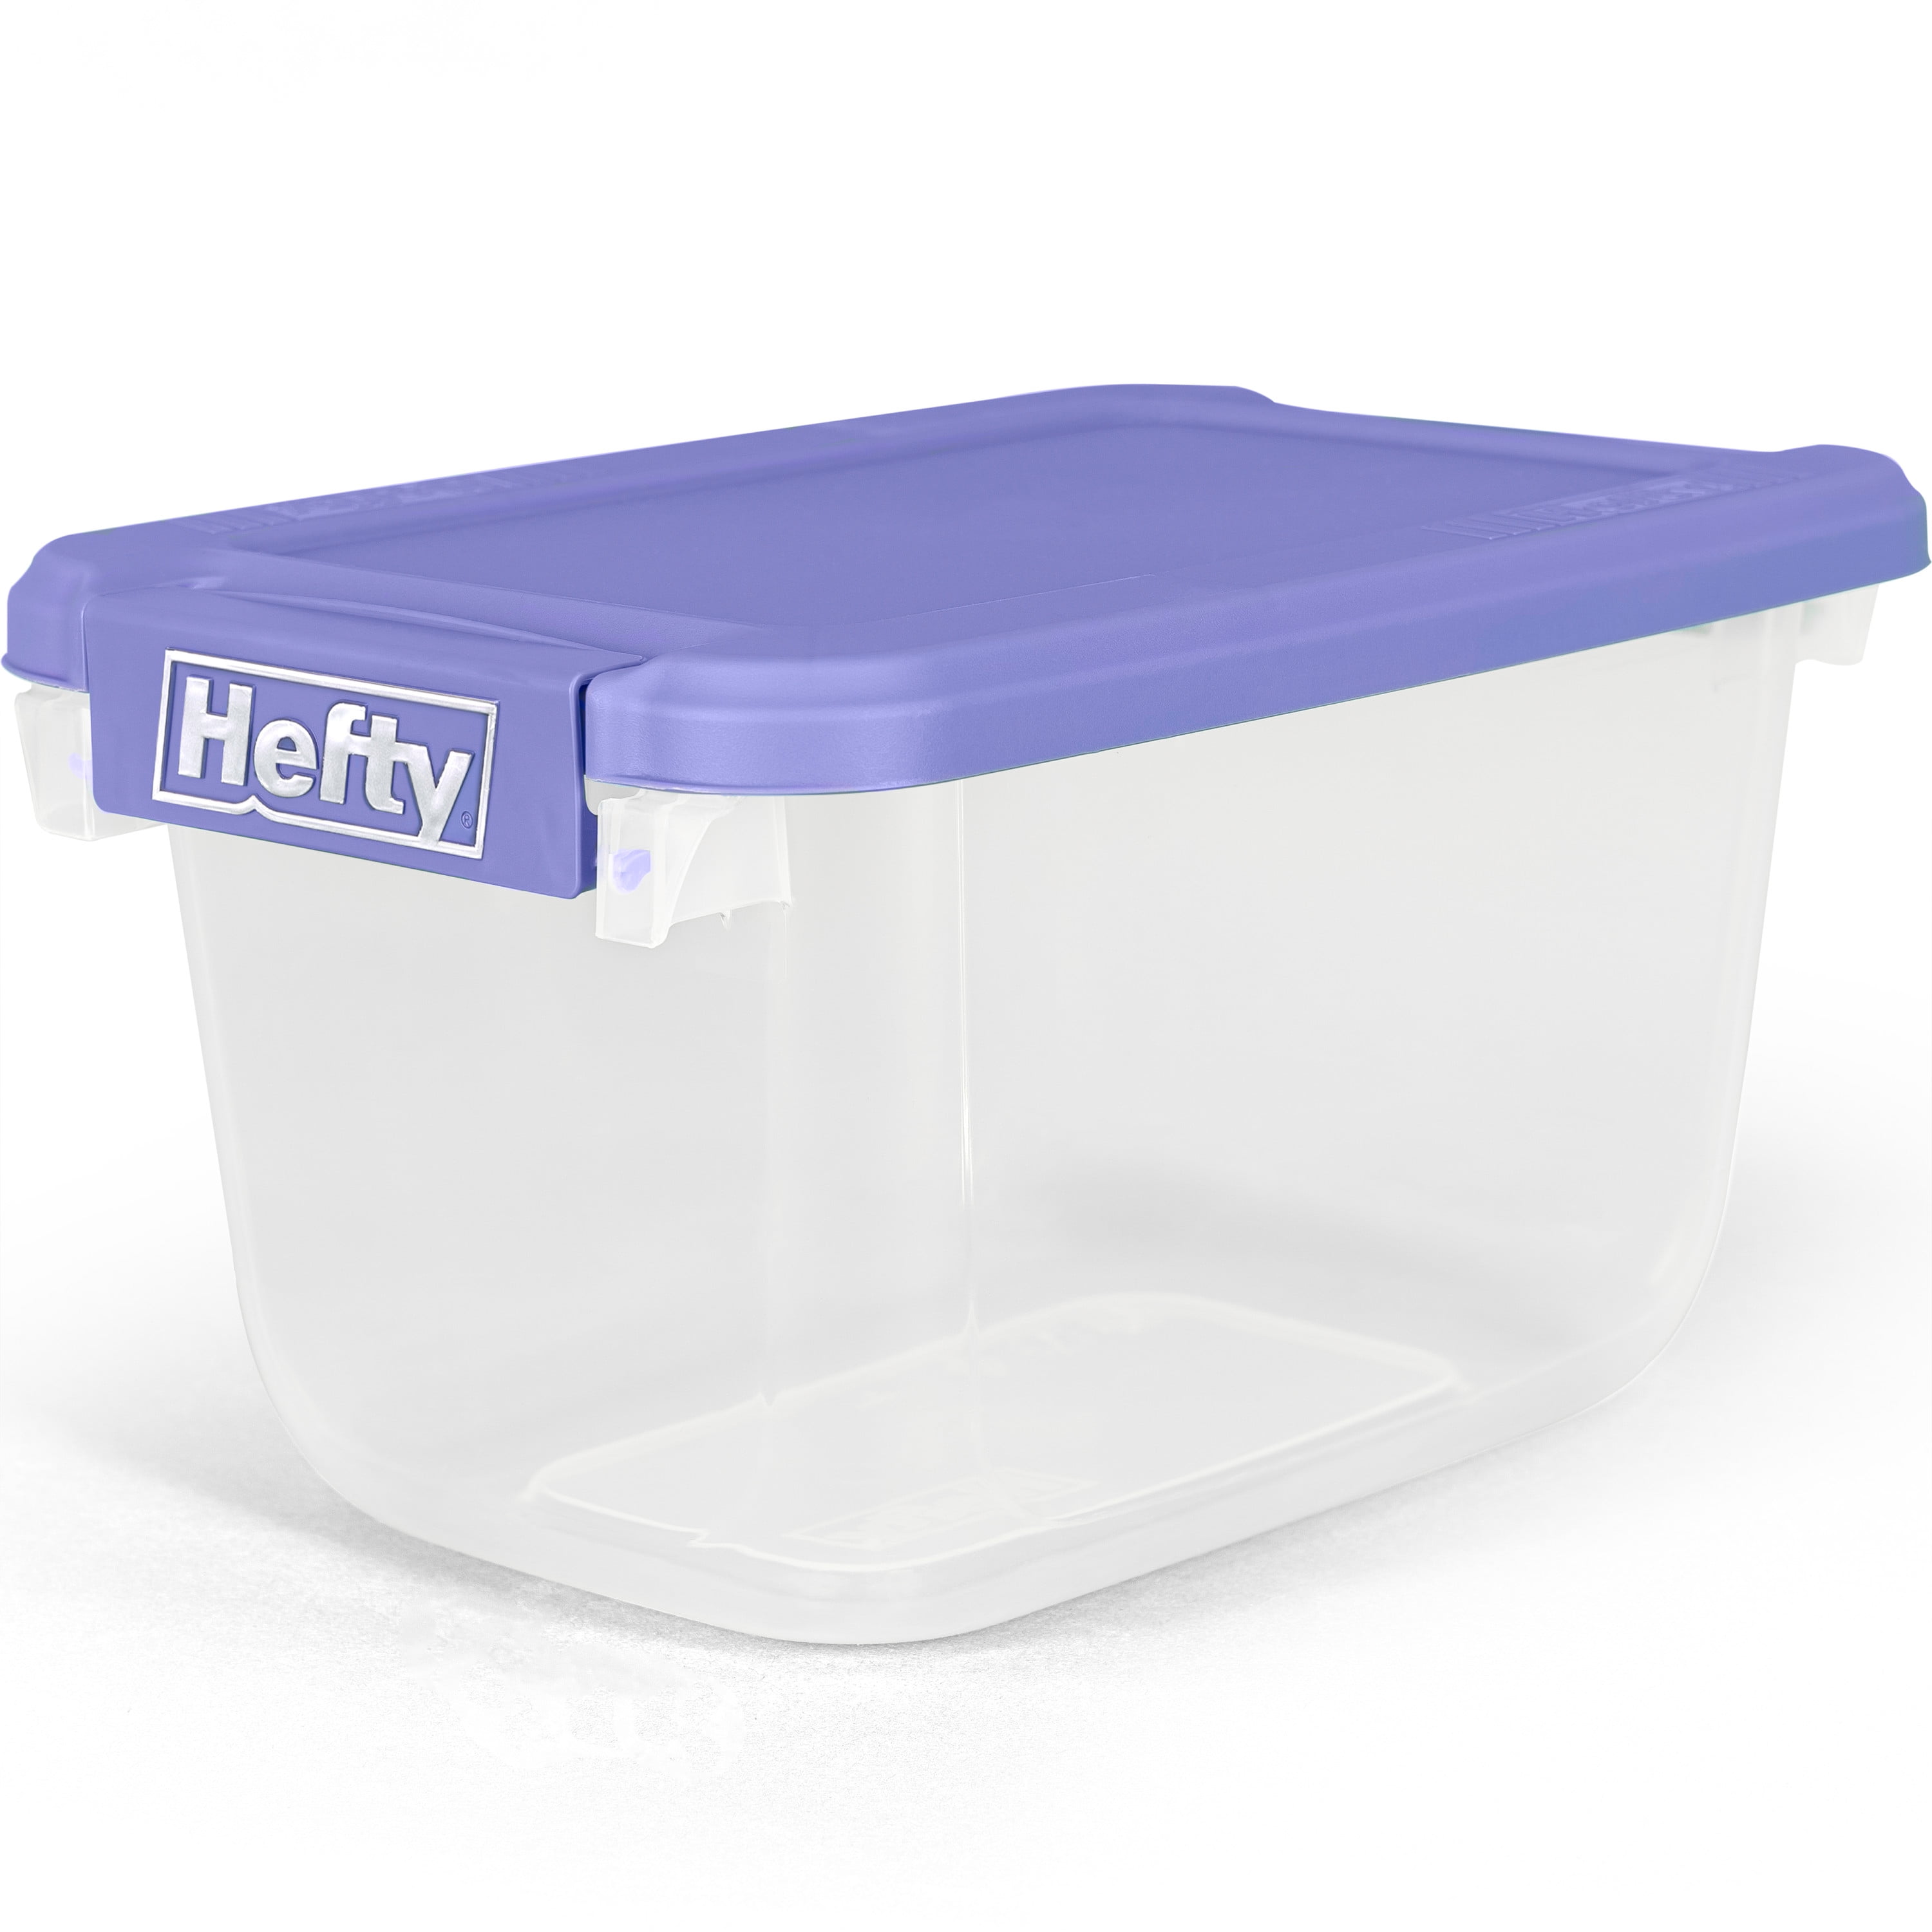  Hefty Clear Plastic Bin with Smoke Blue Lid (8 Pack) - 6.5 qt Storage  Container with Lid, Ideal Space Saver for Closet Shoe Storage Bins and  Under Shelf Storage : Home & Kitchen